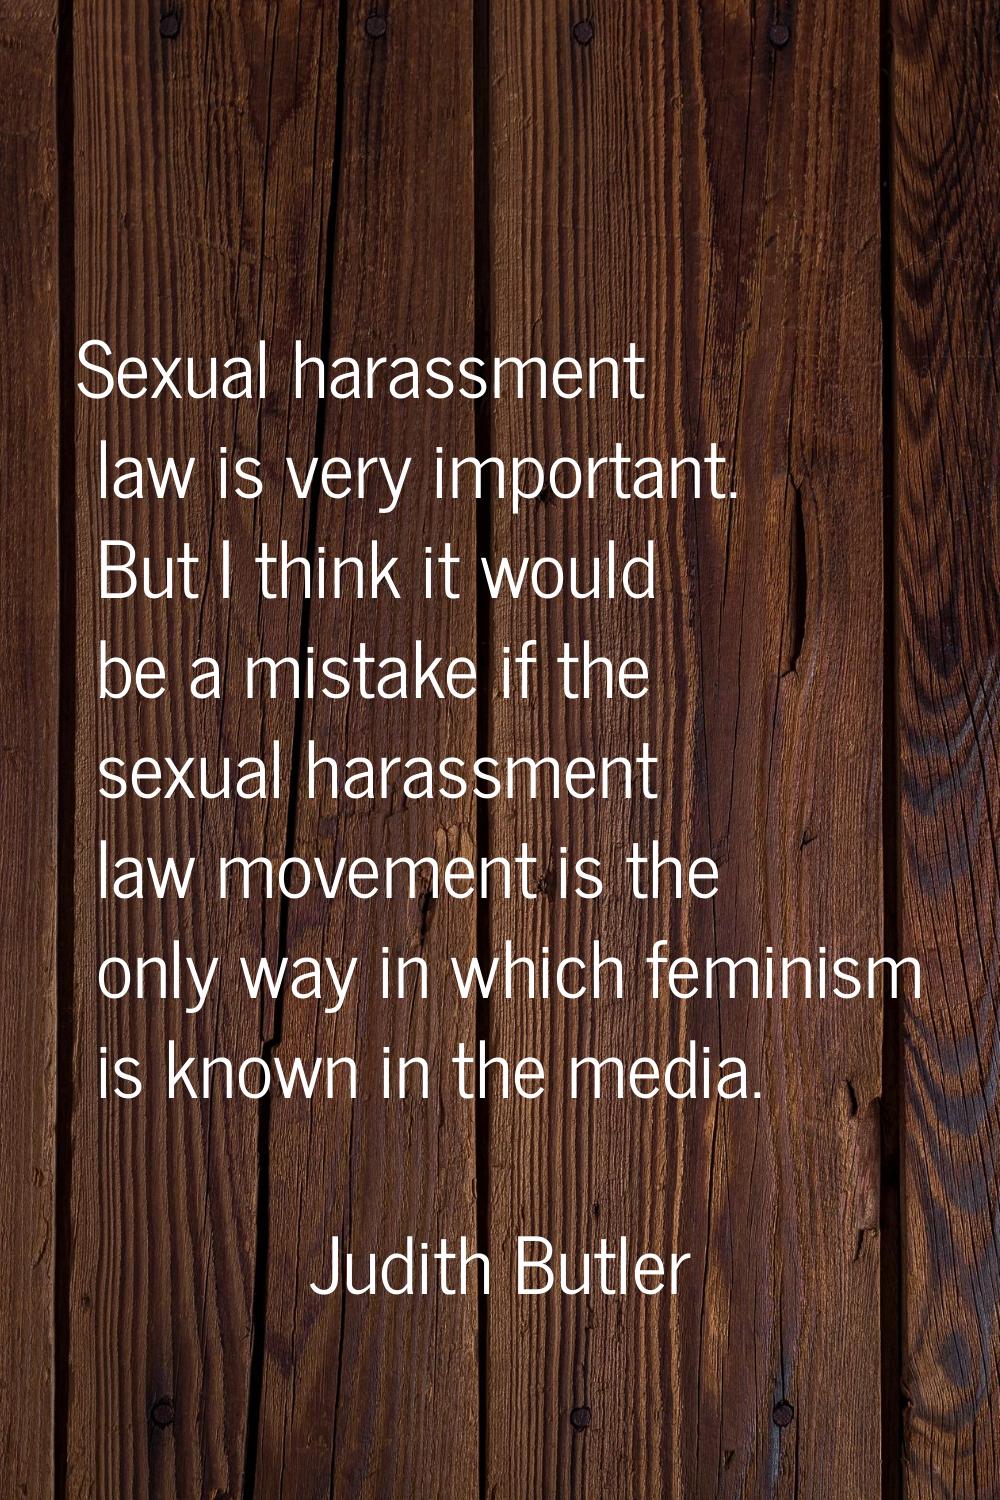 Sexual harassment law is very important. But I think it would be a mistake if the sexual harassment